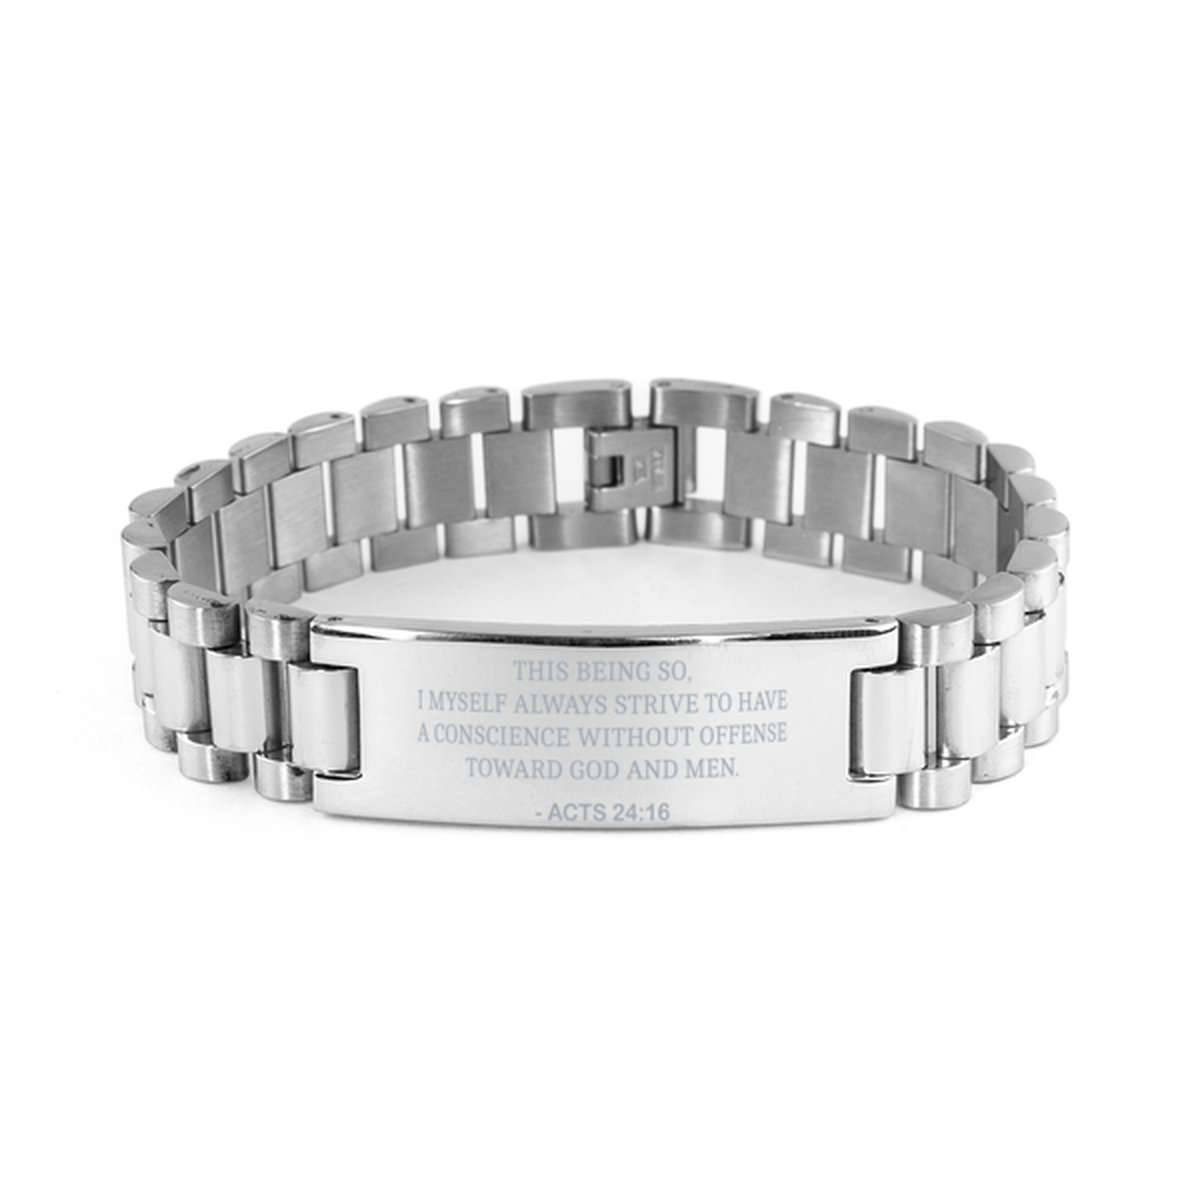 Christian Ladder Stainless Steel Bracelet, Acts 24:16 This Being So, I Myself Always Strive To Have A, Motivational Bible Verse Gifts For Men Women